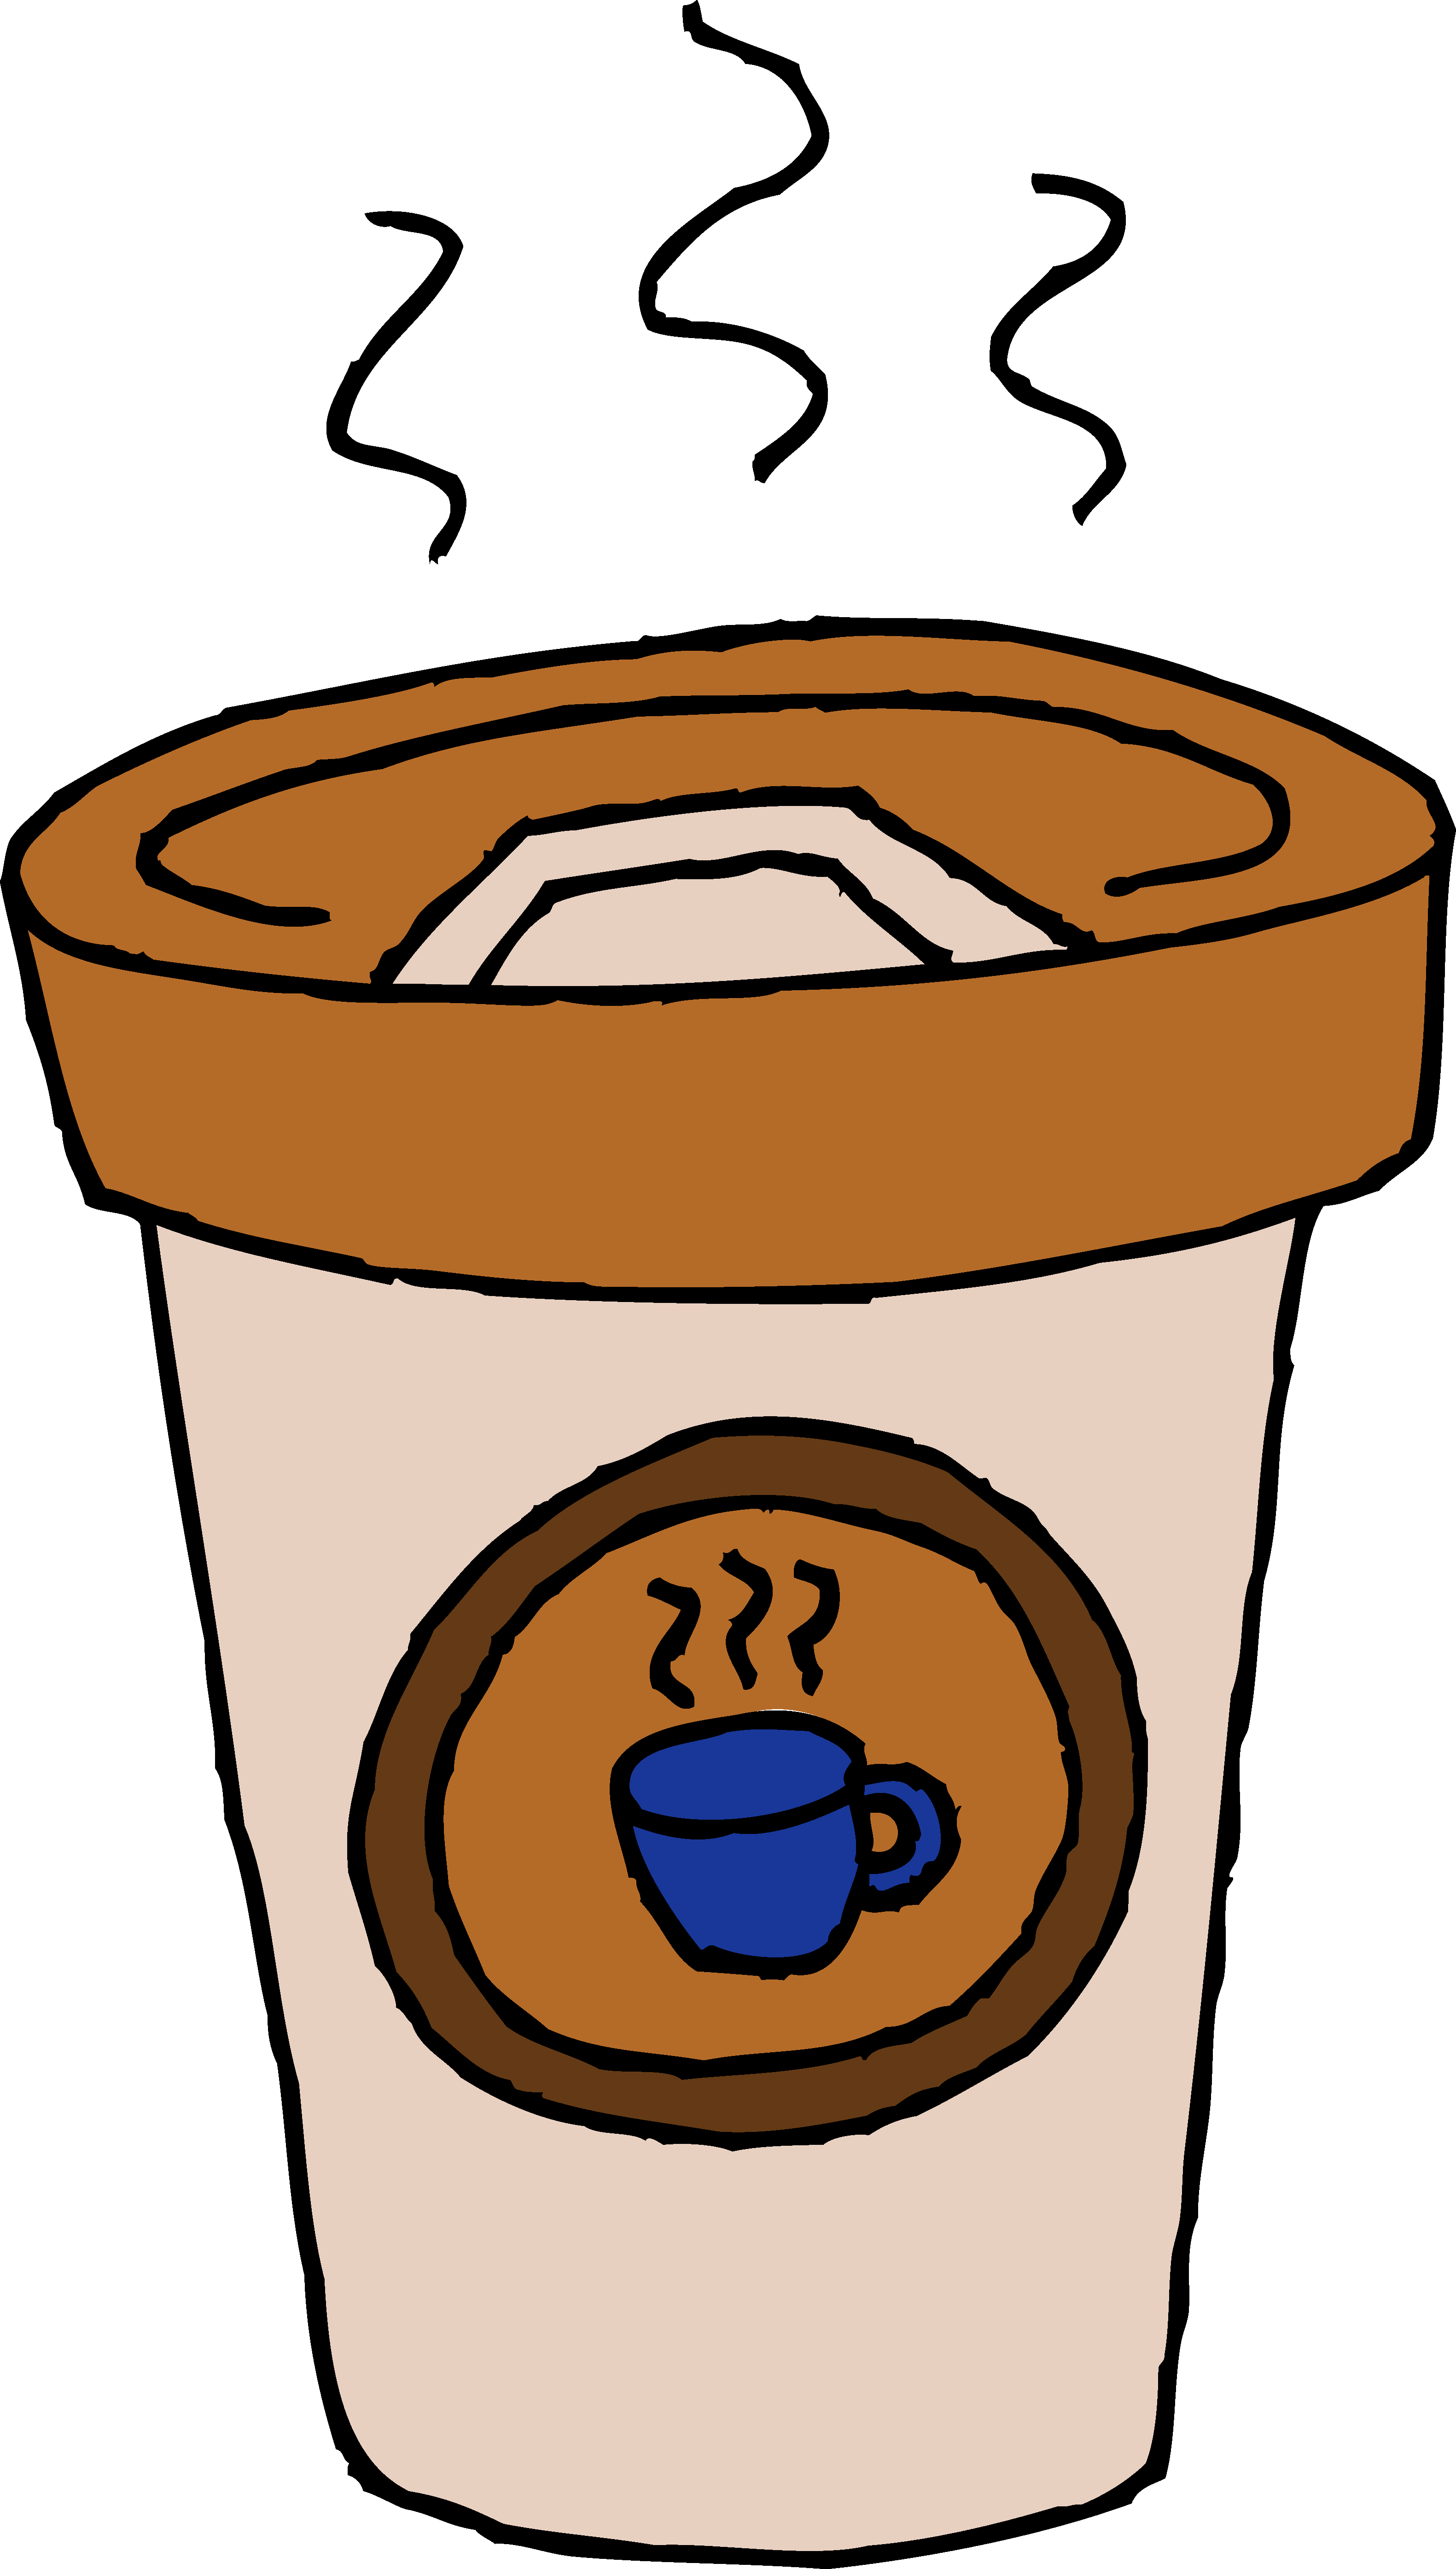 Free Animated Cafe Cliparts, Download Free Clip Art, Free